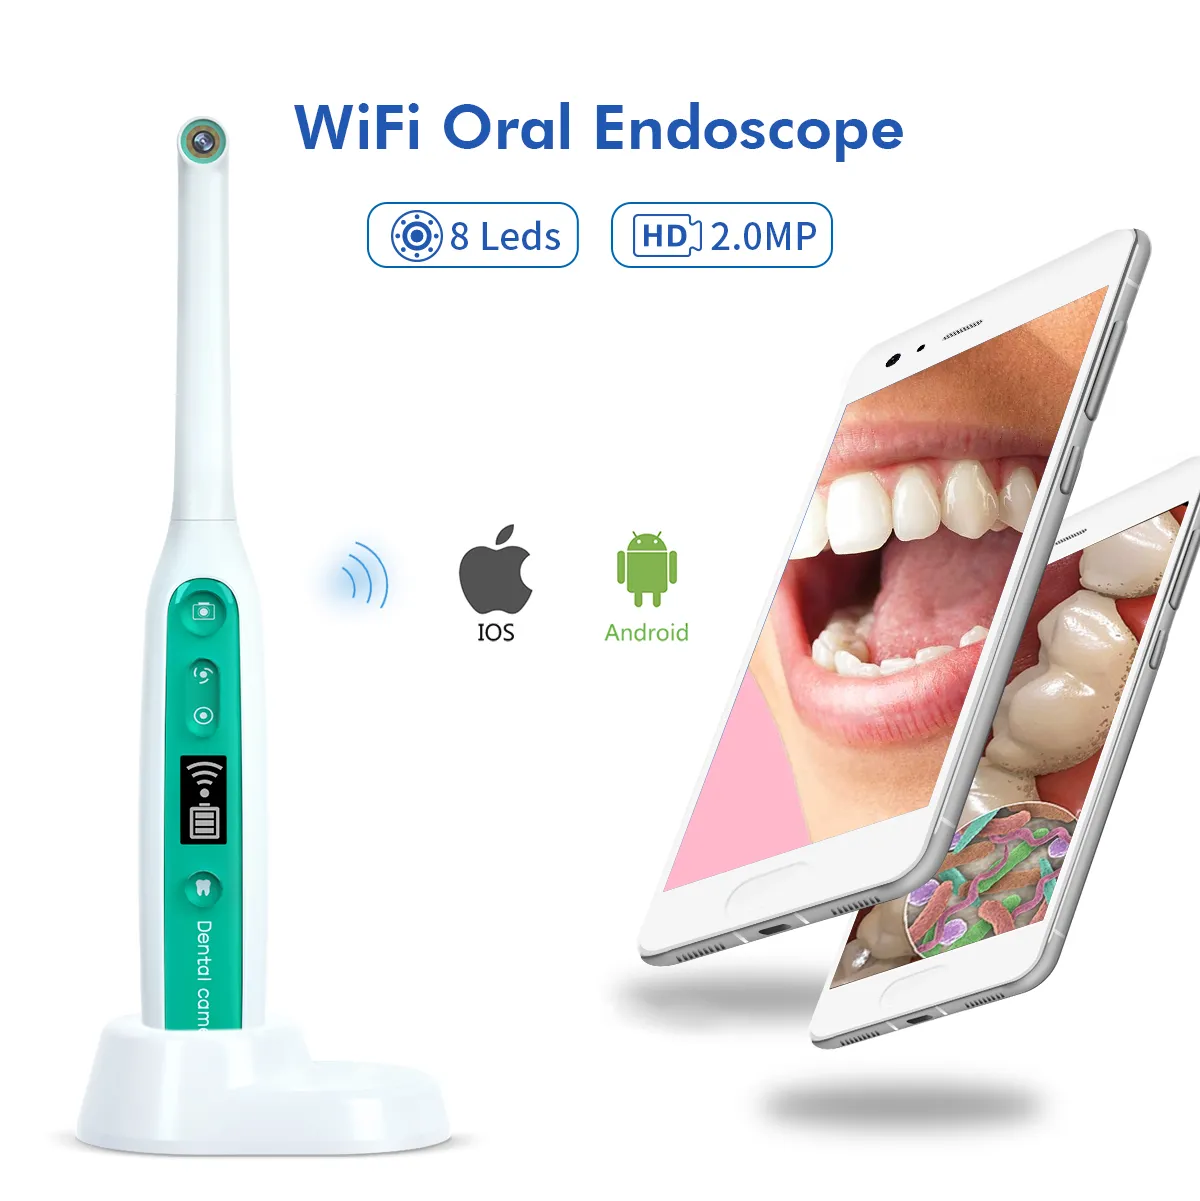 Intraoral dental mirror 1080p hd waterproof teeth inspection diagnostic tool for iphone thumb200